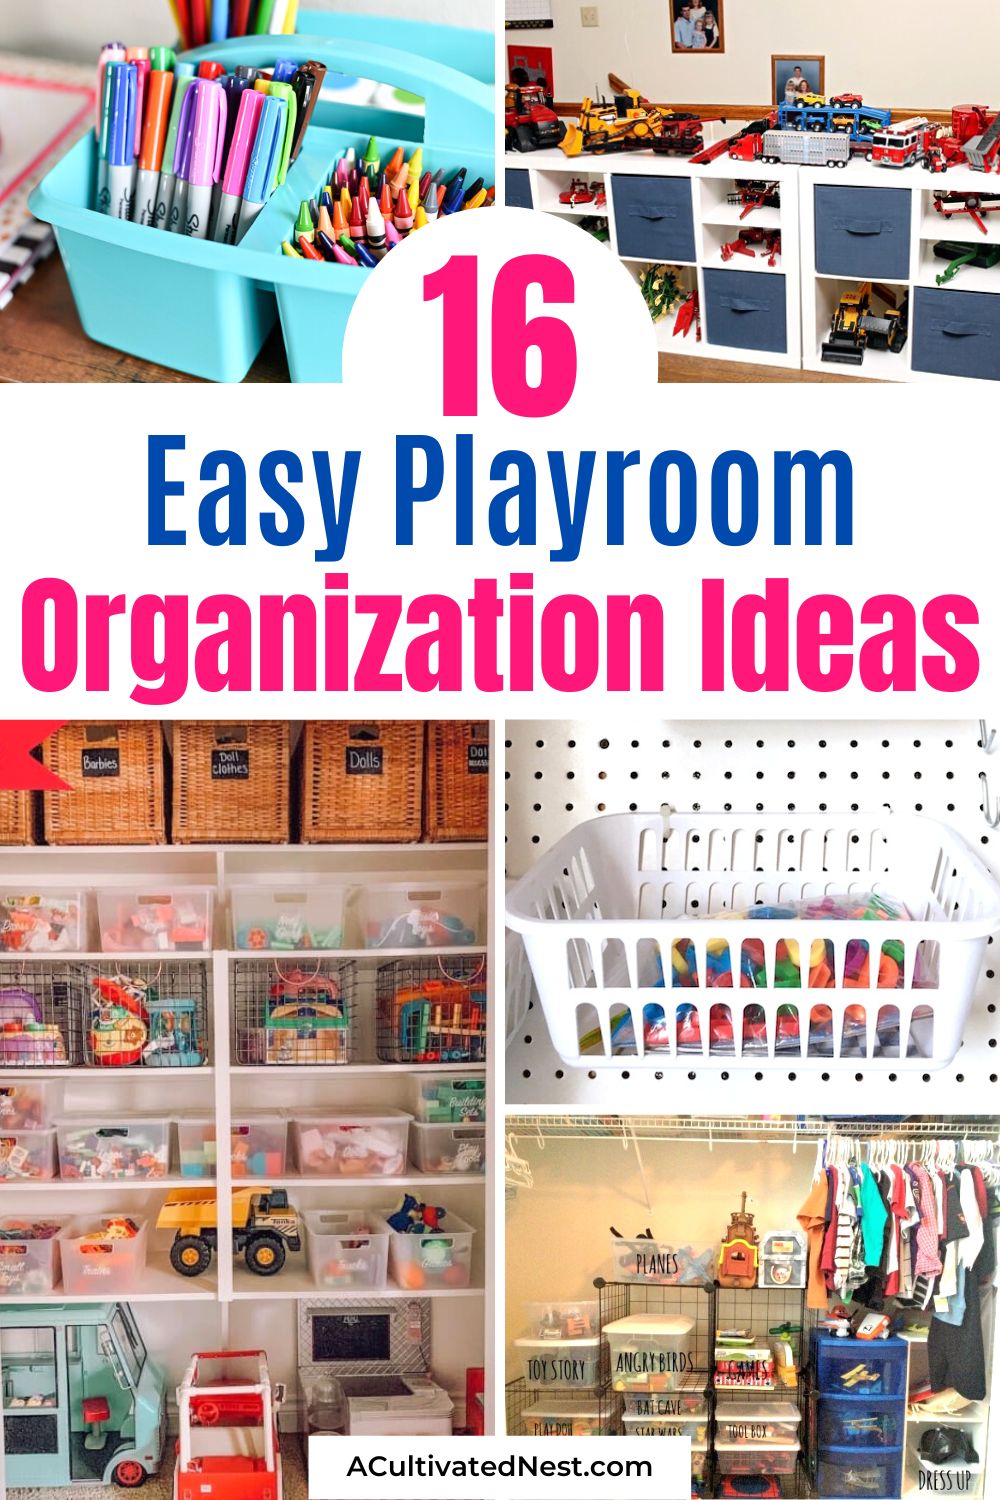 16 Easy Playroom Organization Ideas- Say goodbye to playroom chaos! Discover brilliant and easy playroom organization ideas that will keep toys, games, and crafts neatly sorted. Create a space where imagination thrives, making playtime a breeze. | #OrganizationInspiration #organizingTips #organization #KidsPlayroom #ACultivatedNest